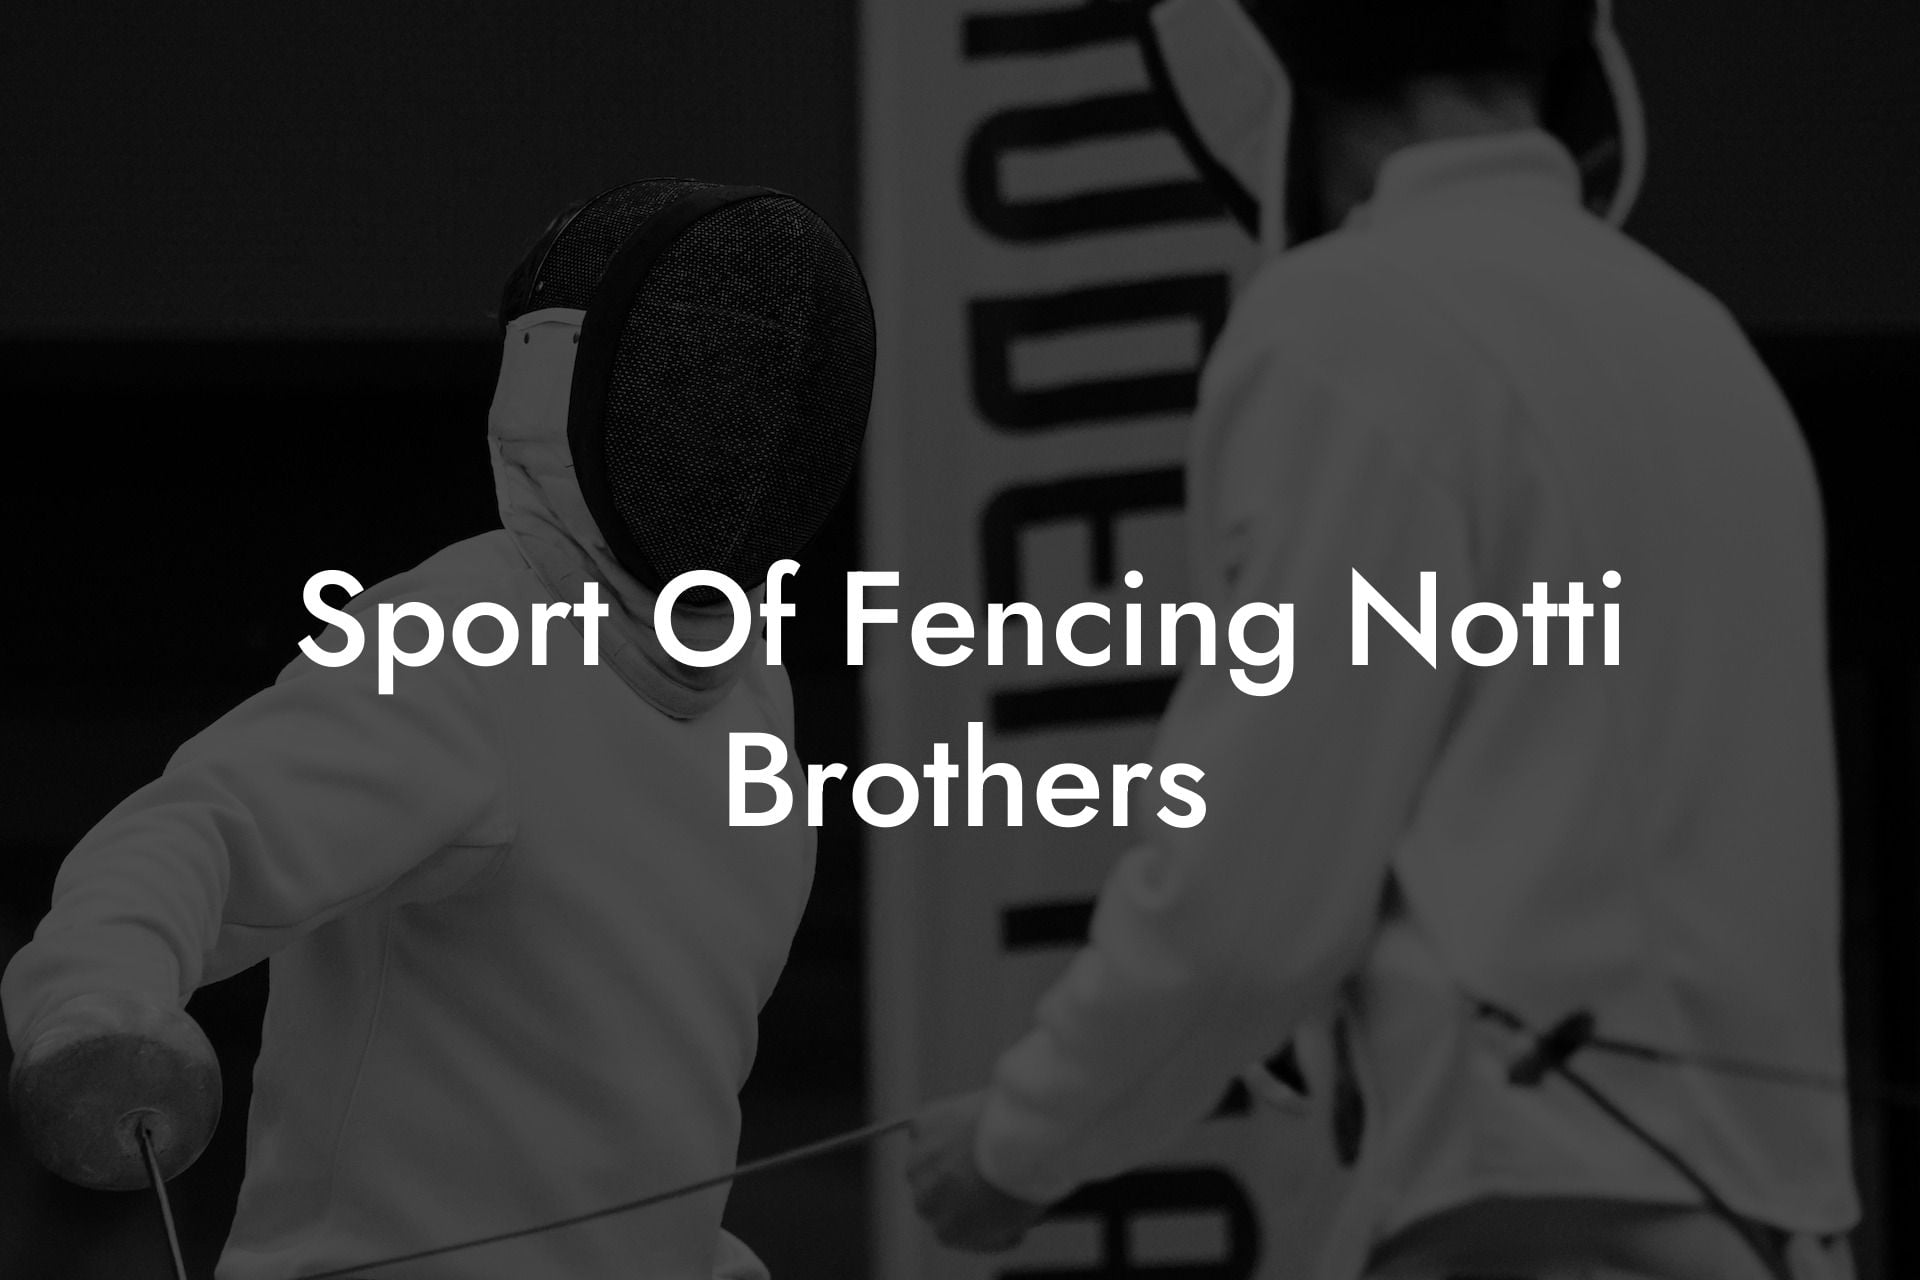 Sport Of Fencing Notti Brothers